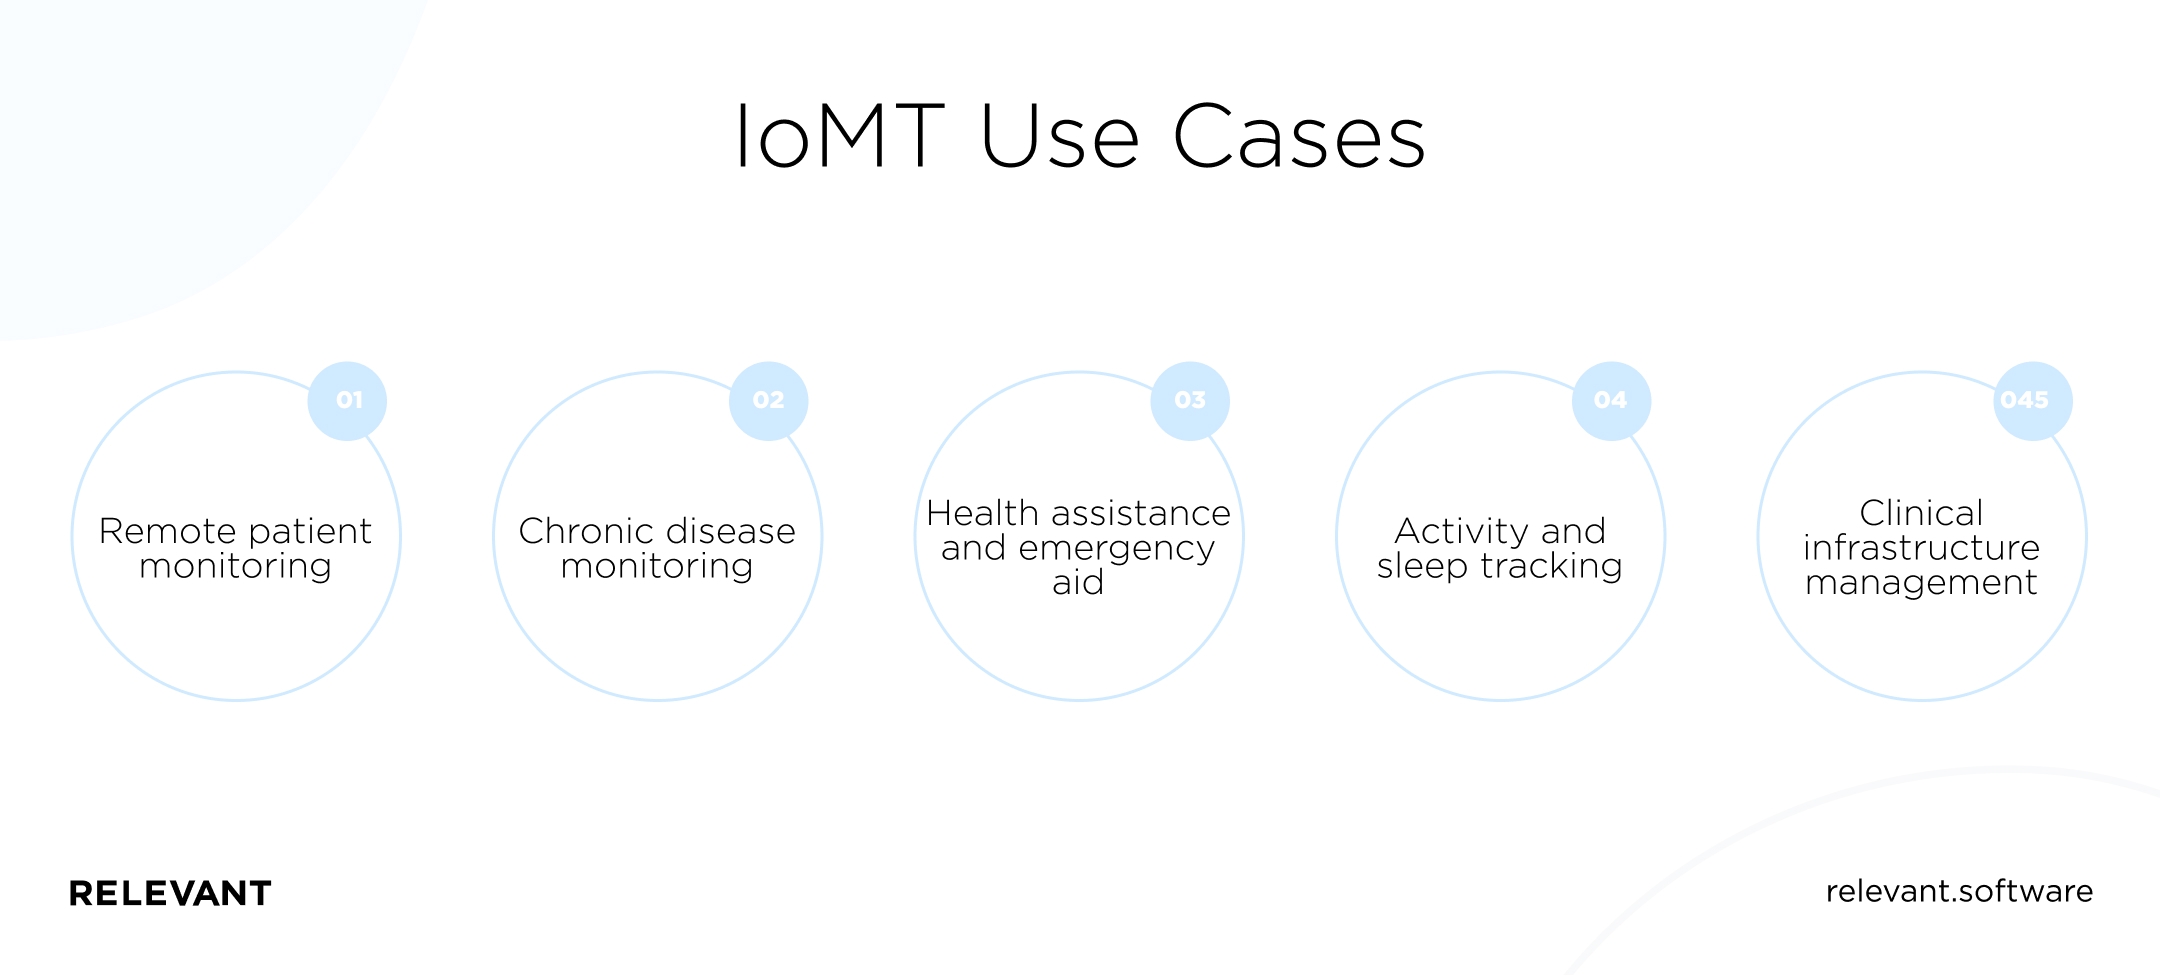 IoMT Use Cases